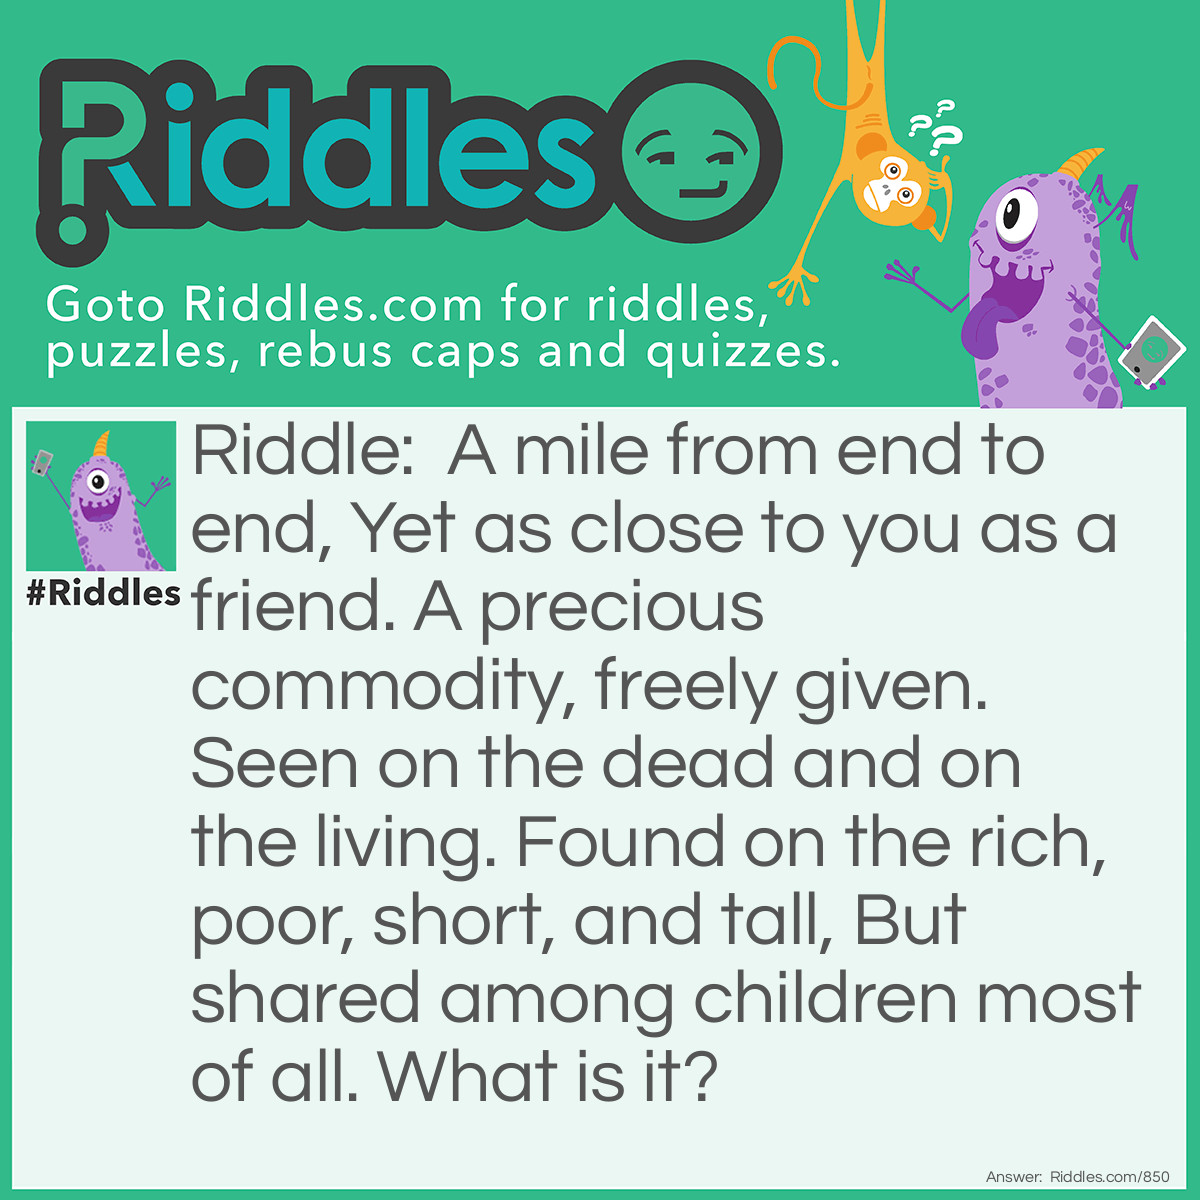 Riddle: A mile from end to end, Yet as close to you as a friend. A precious commodity, freely given. Seen on the dead and on the living. Found on the rich, poor, short, and tall, But shared among children most of all. What is it? Answer: A simple smile.